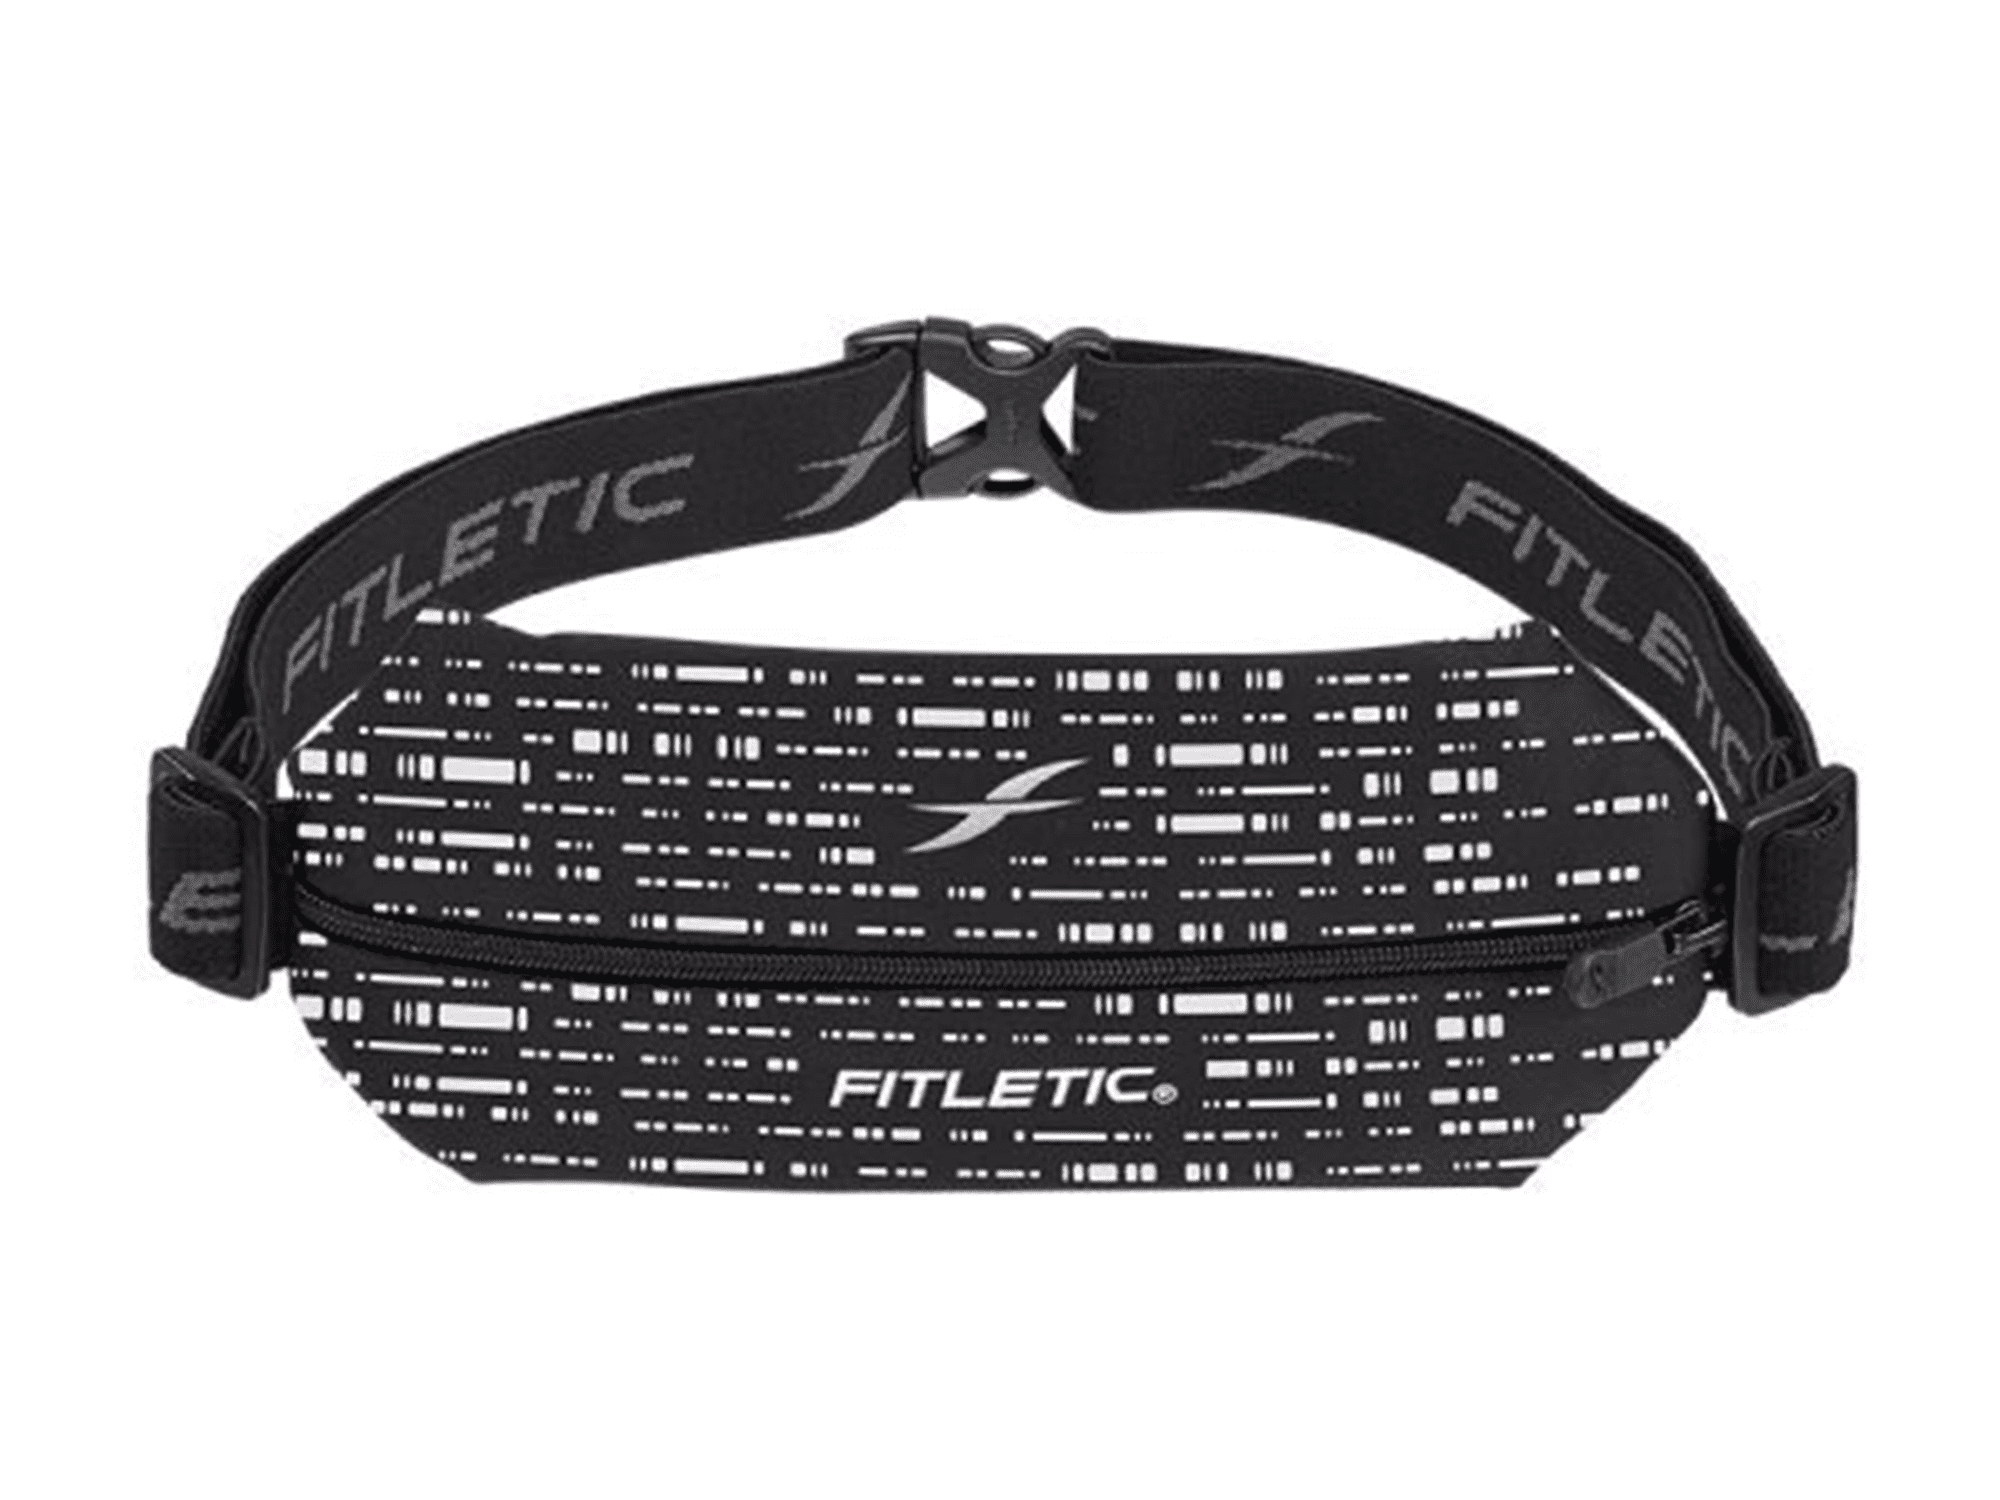 Fitletic Running Gear - Made for Runners, by Runners.